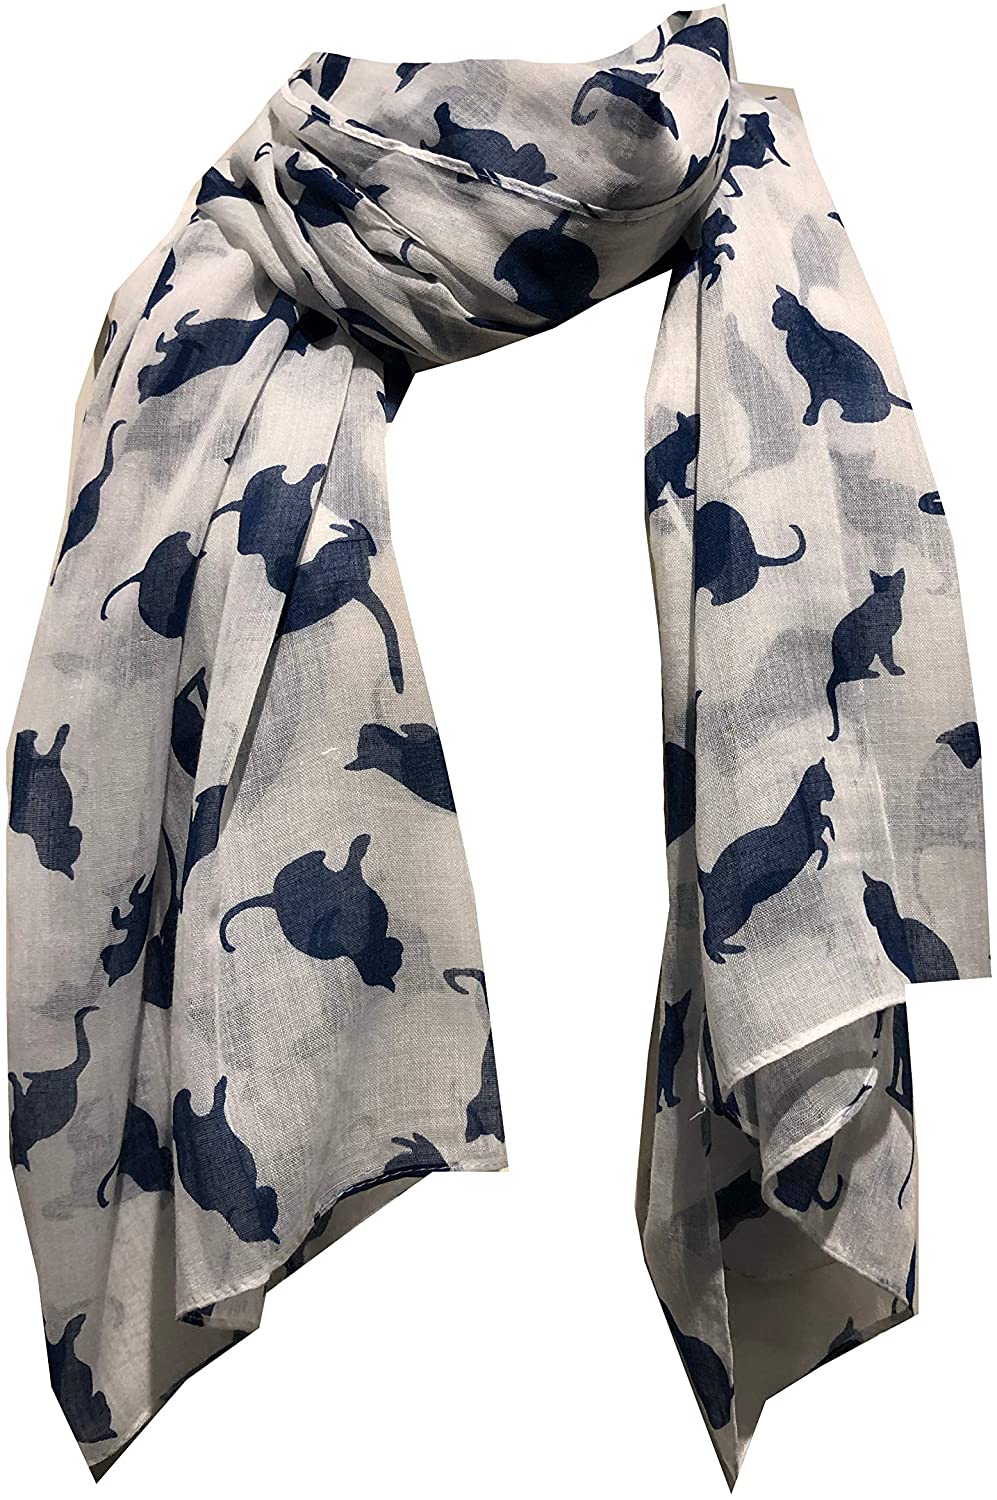 Creamy White with Navy Cats Scarf for owmen